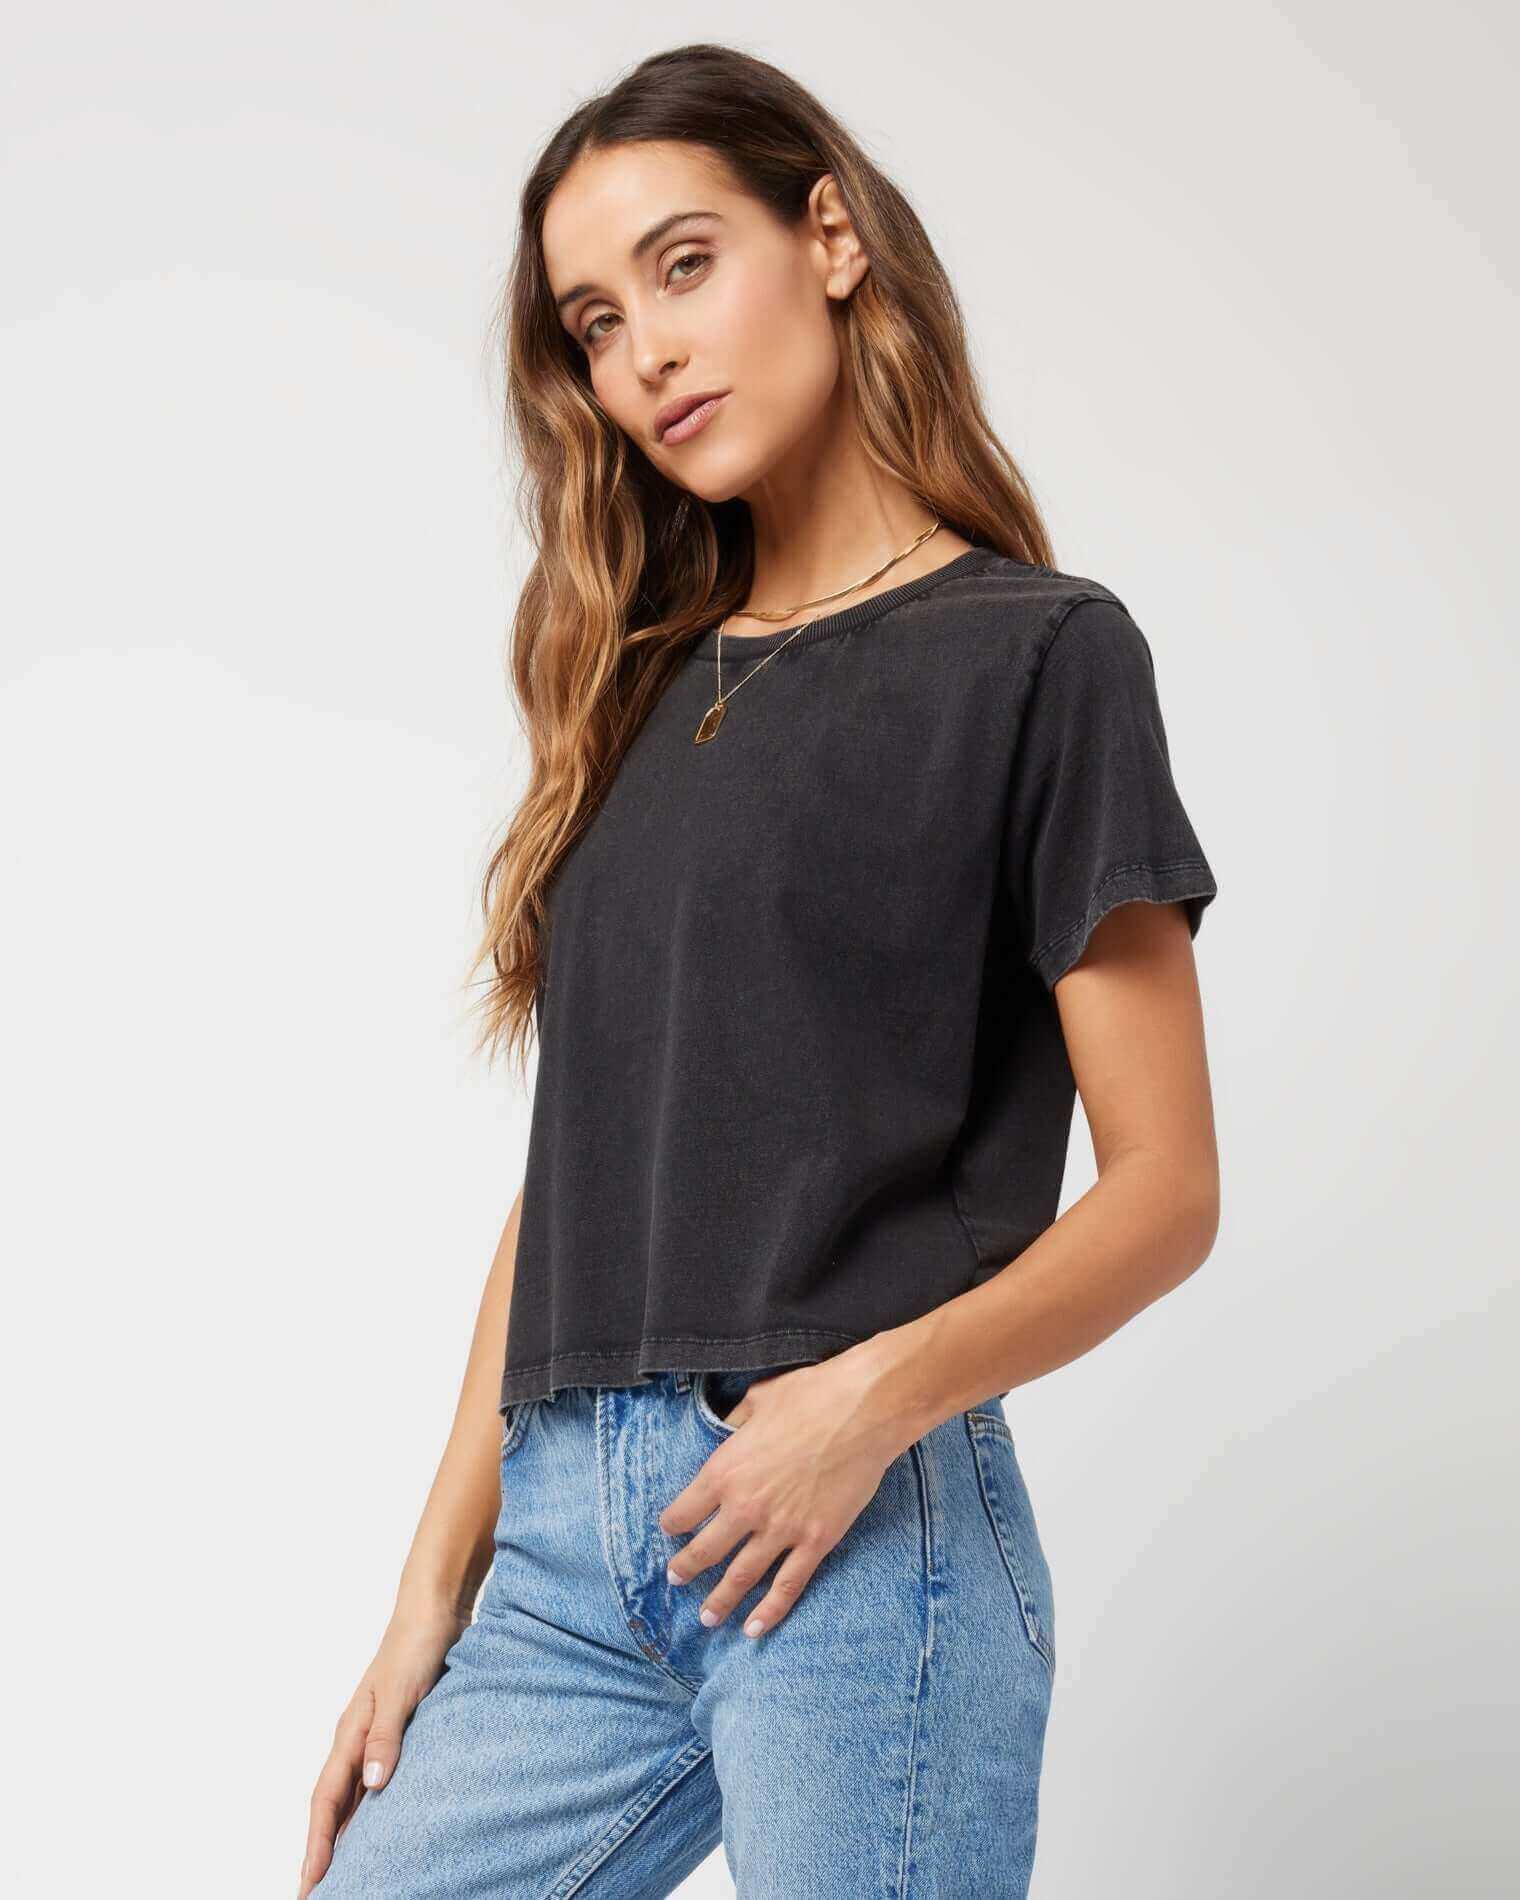 LSpace - All Day Top - Black - Side